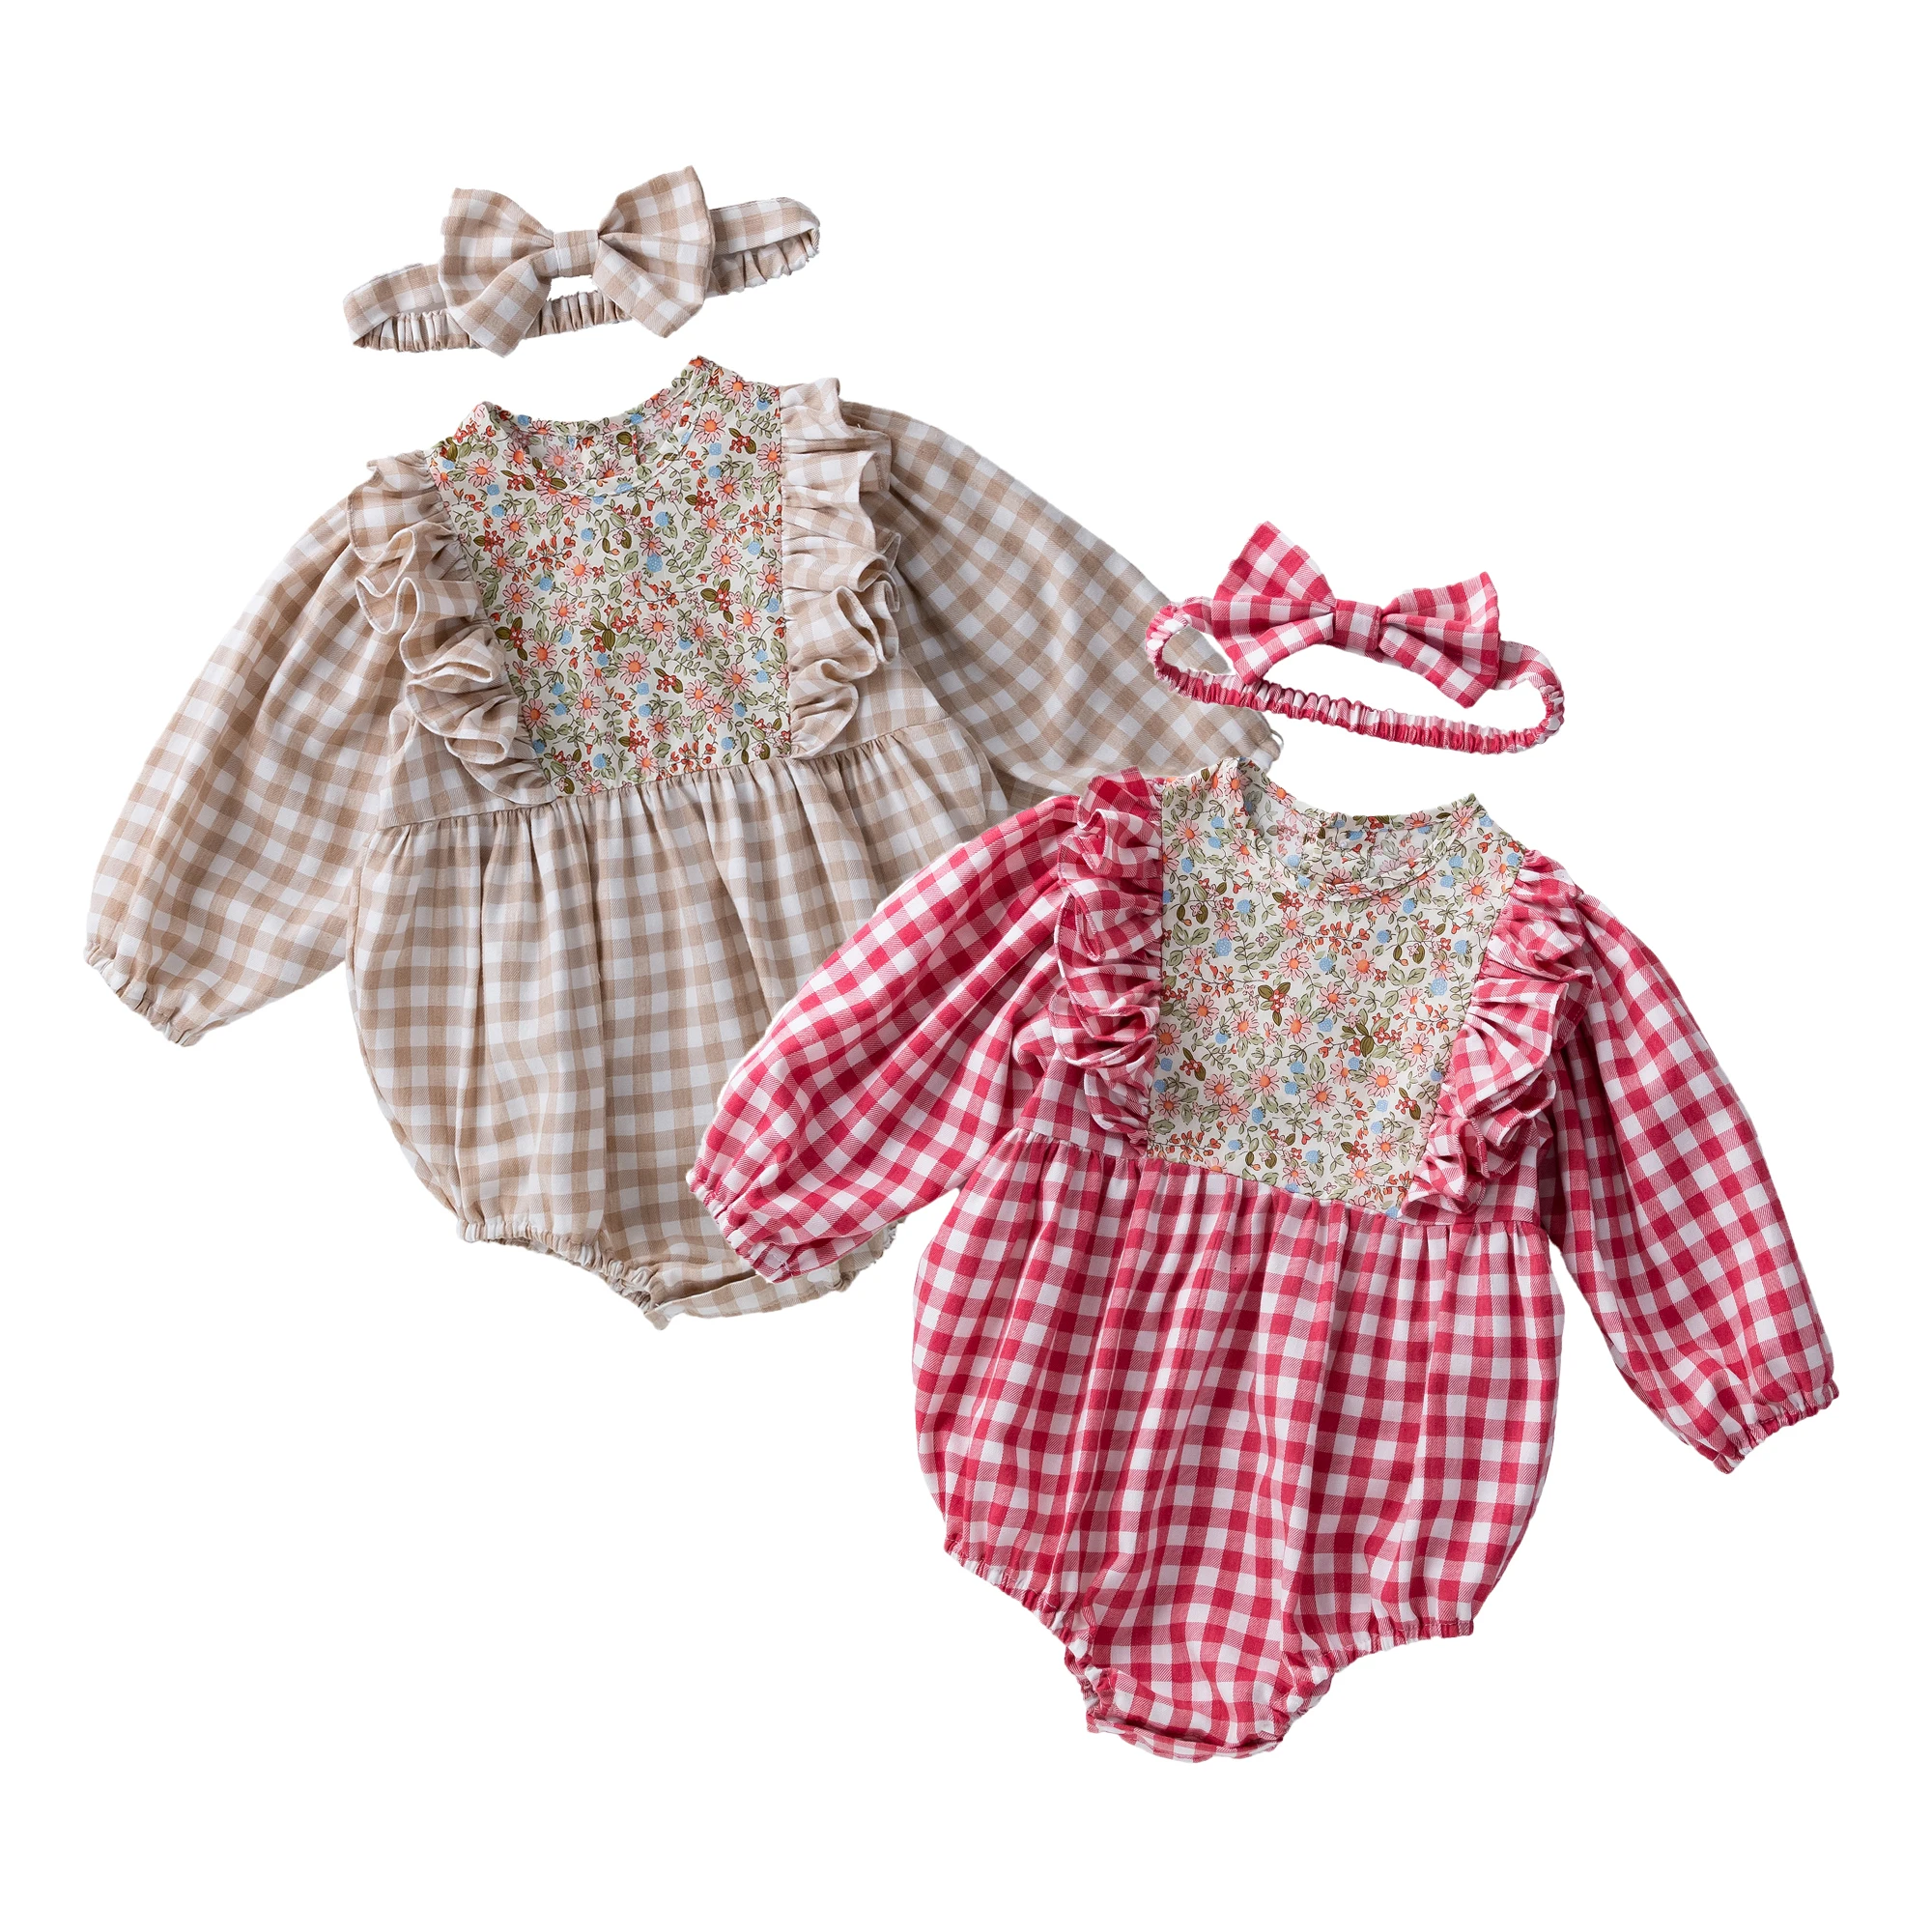 

Babany bebe 2PCS Newborn Baby Girls Casual Outfit Party Floral Printing Dress Costume, Picture shown